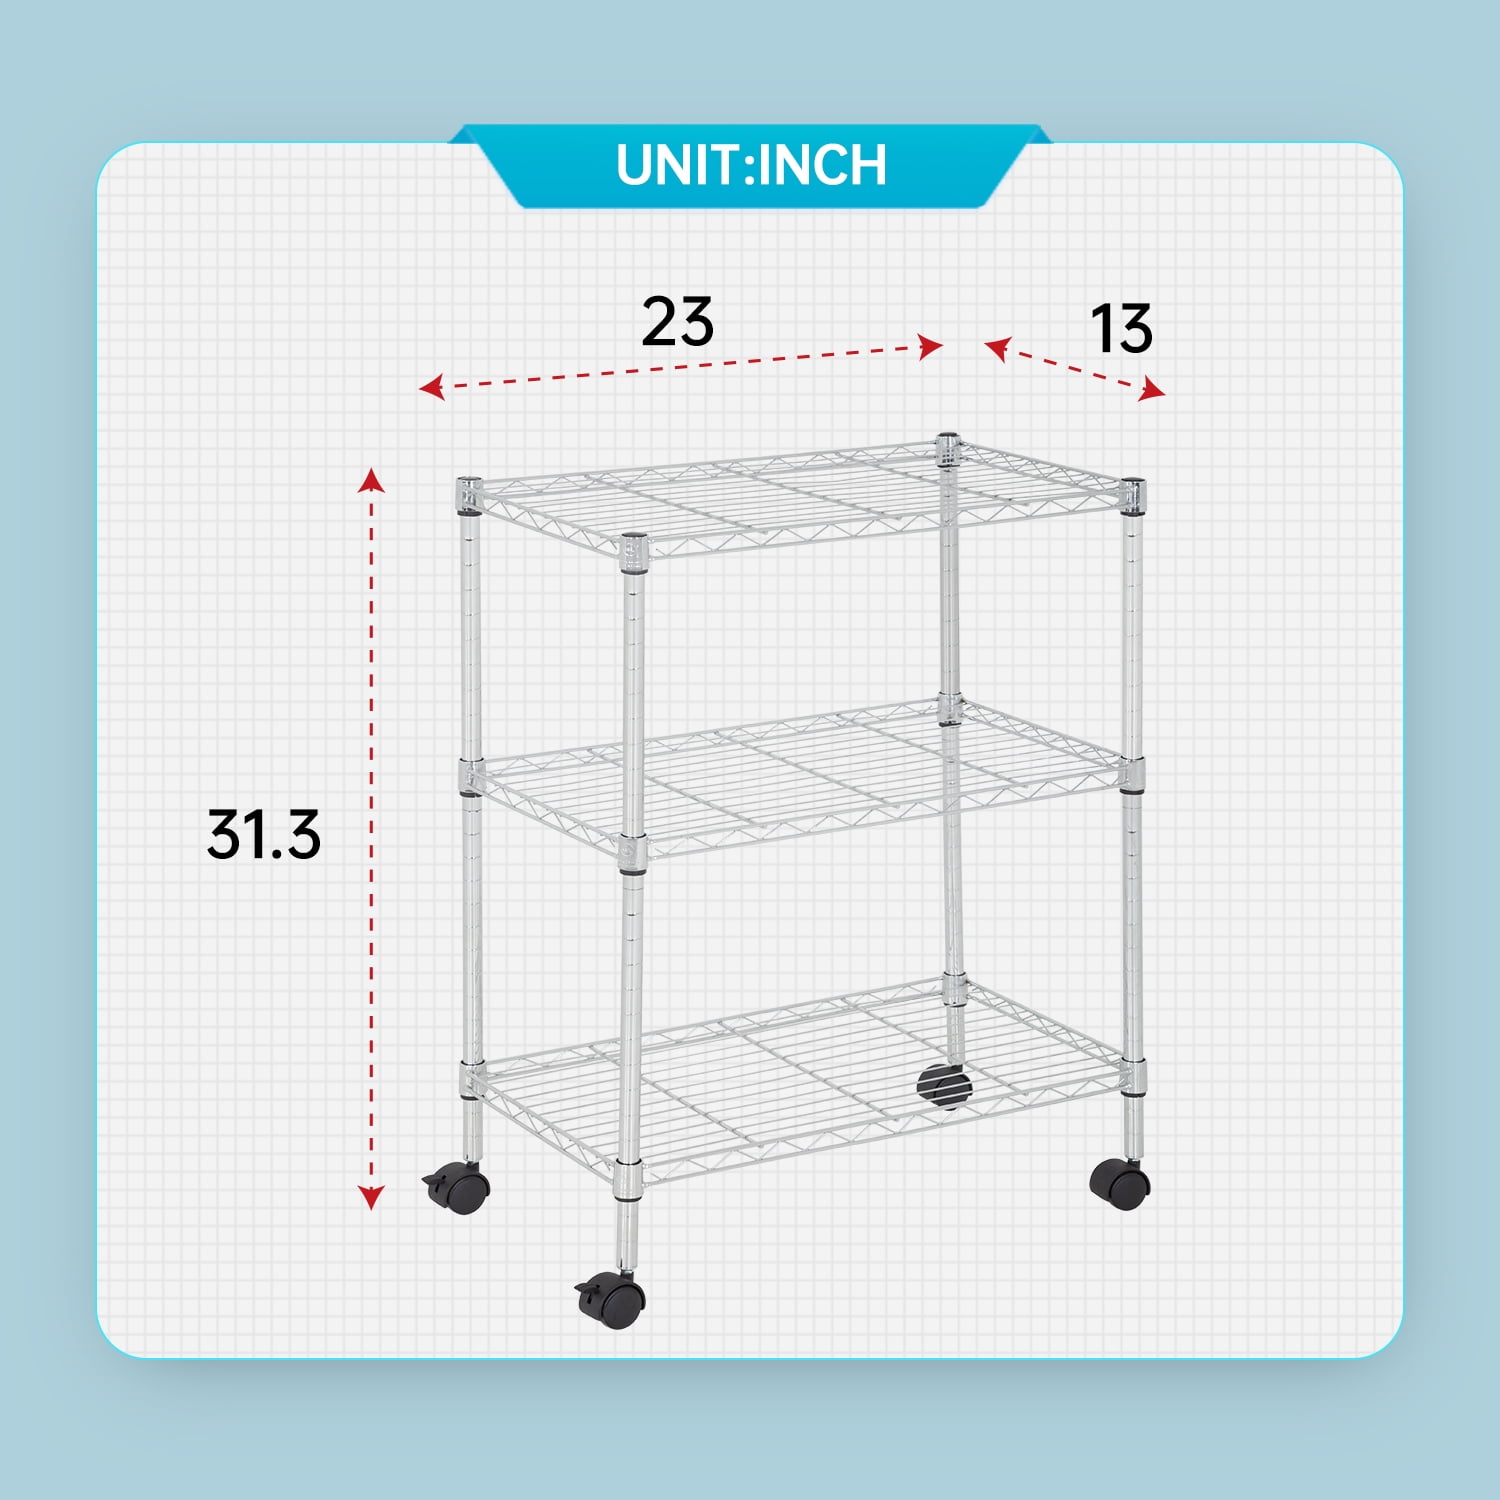 Dlewmsyic 3-Tier Small Wire Shelving Unit, Metal Shelf Height Adjustable  23Lx13.2Wx30.2H 450lbs for Kitchen Pantry Office Rack, Black Storage Shelves